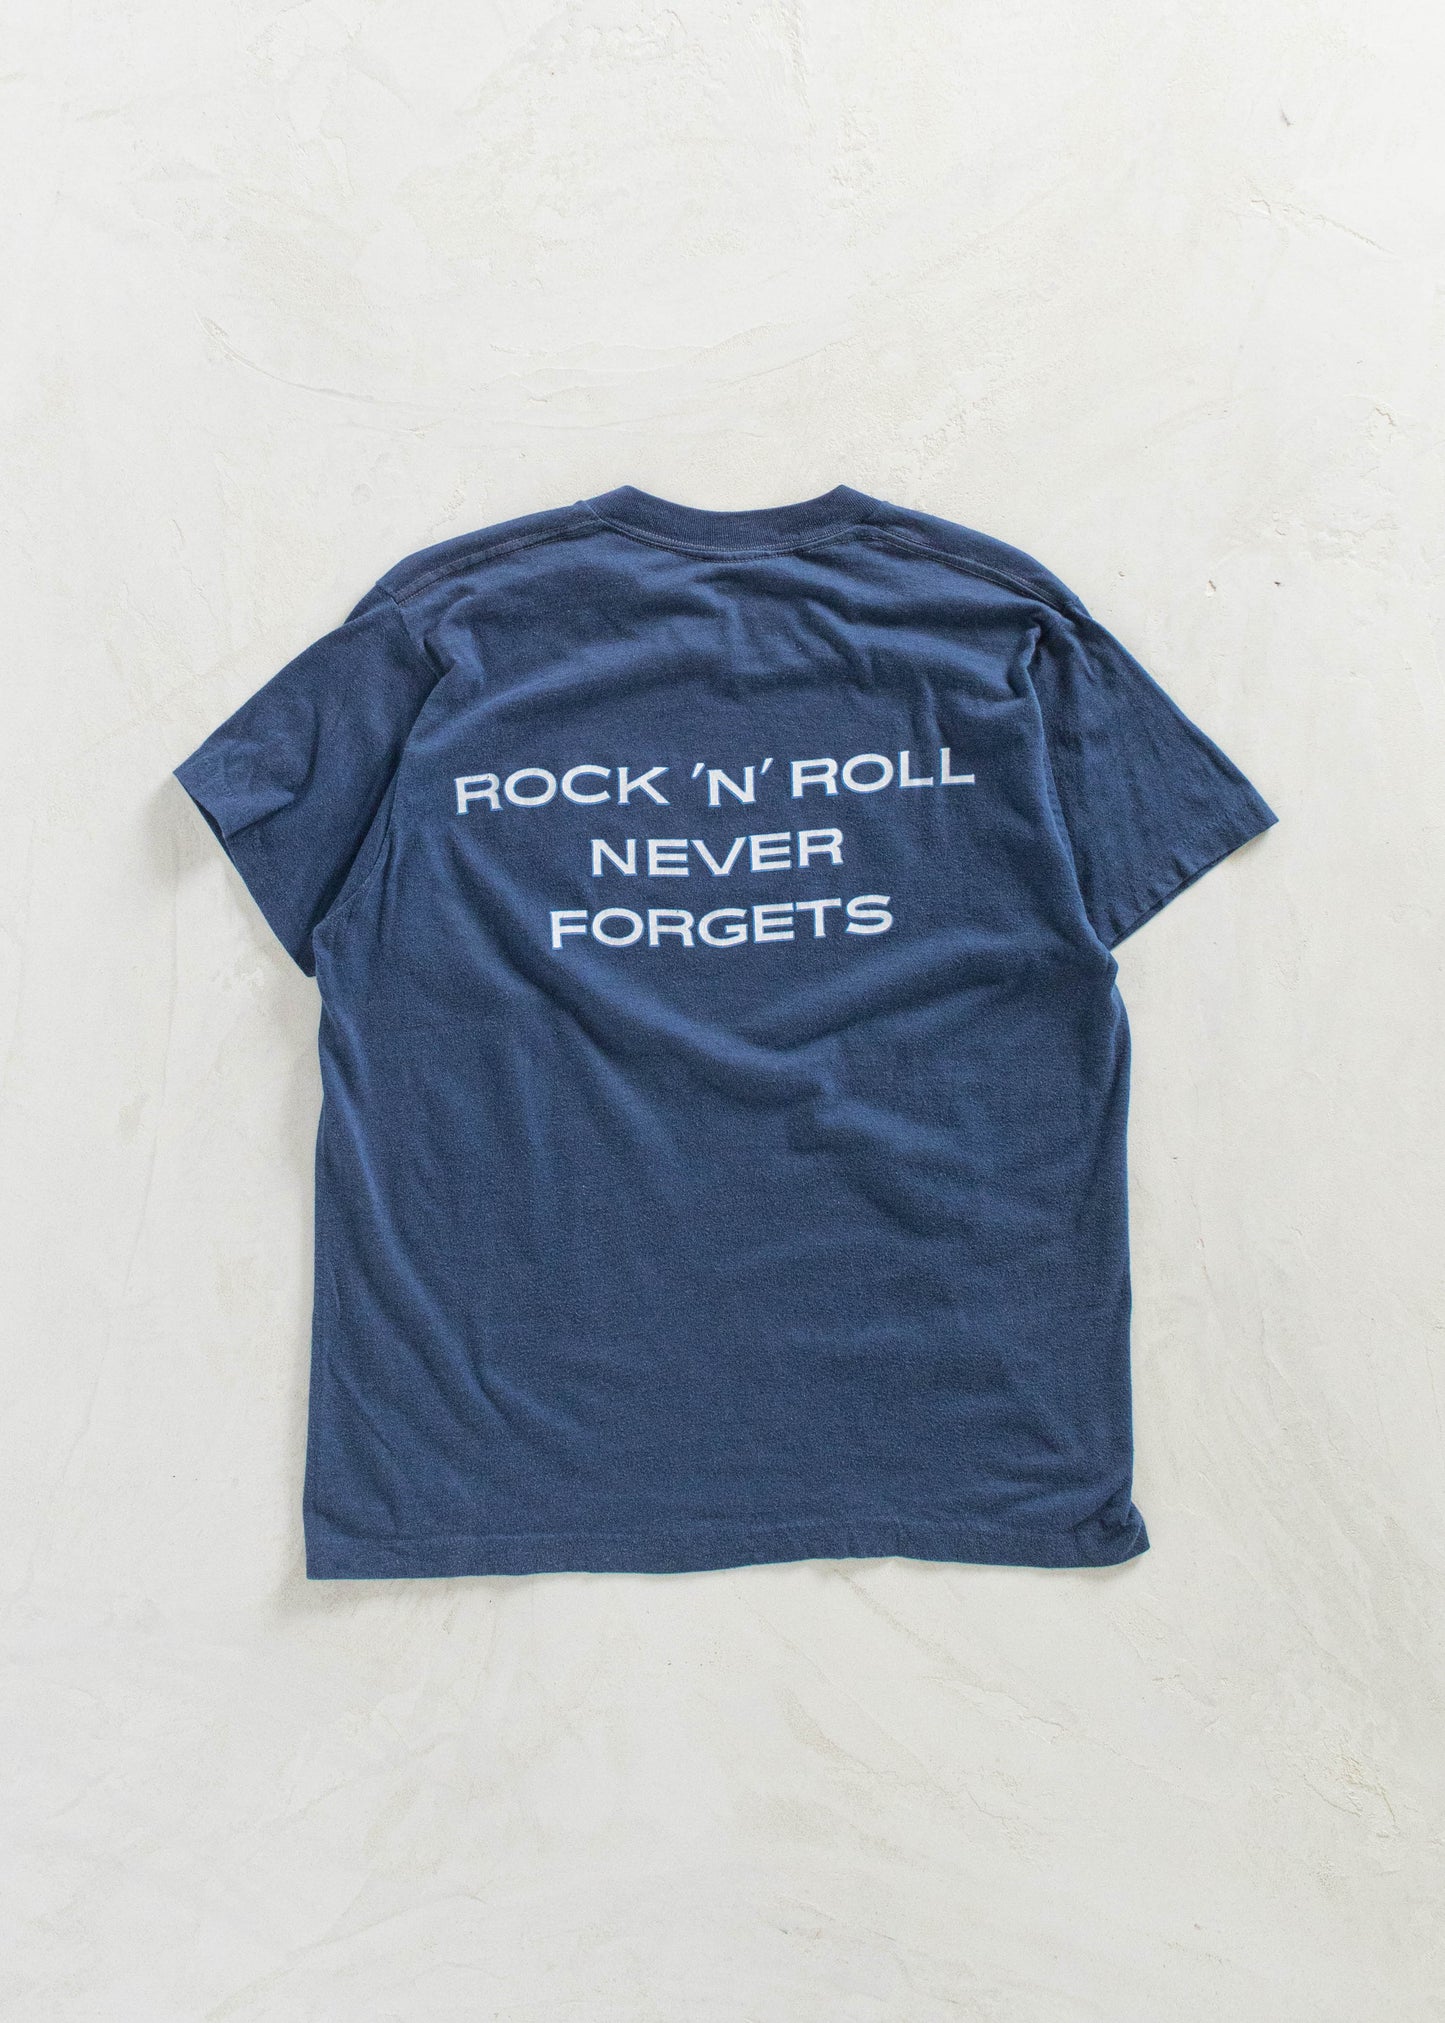 Vintage 1986 Bob Seger And The Silver Bullet Band Rock'N'Roll Never Forgets T-Shirt Size M/L